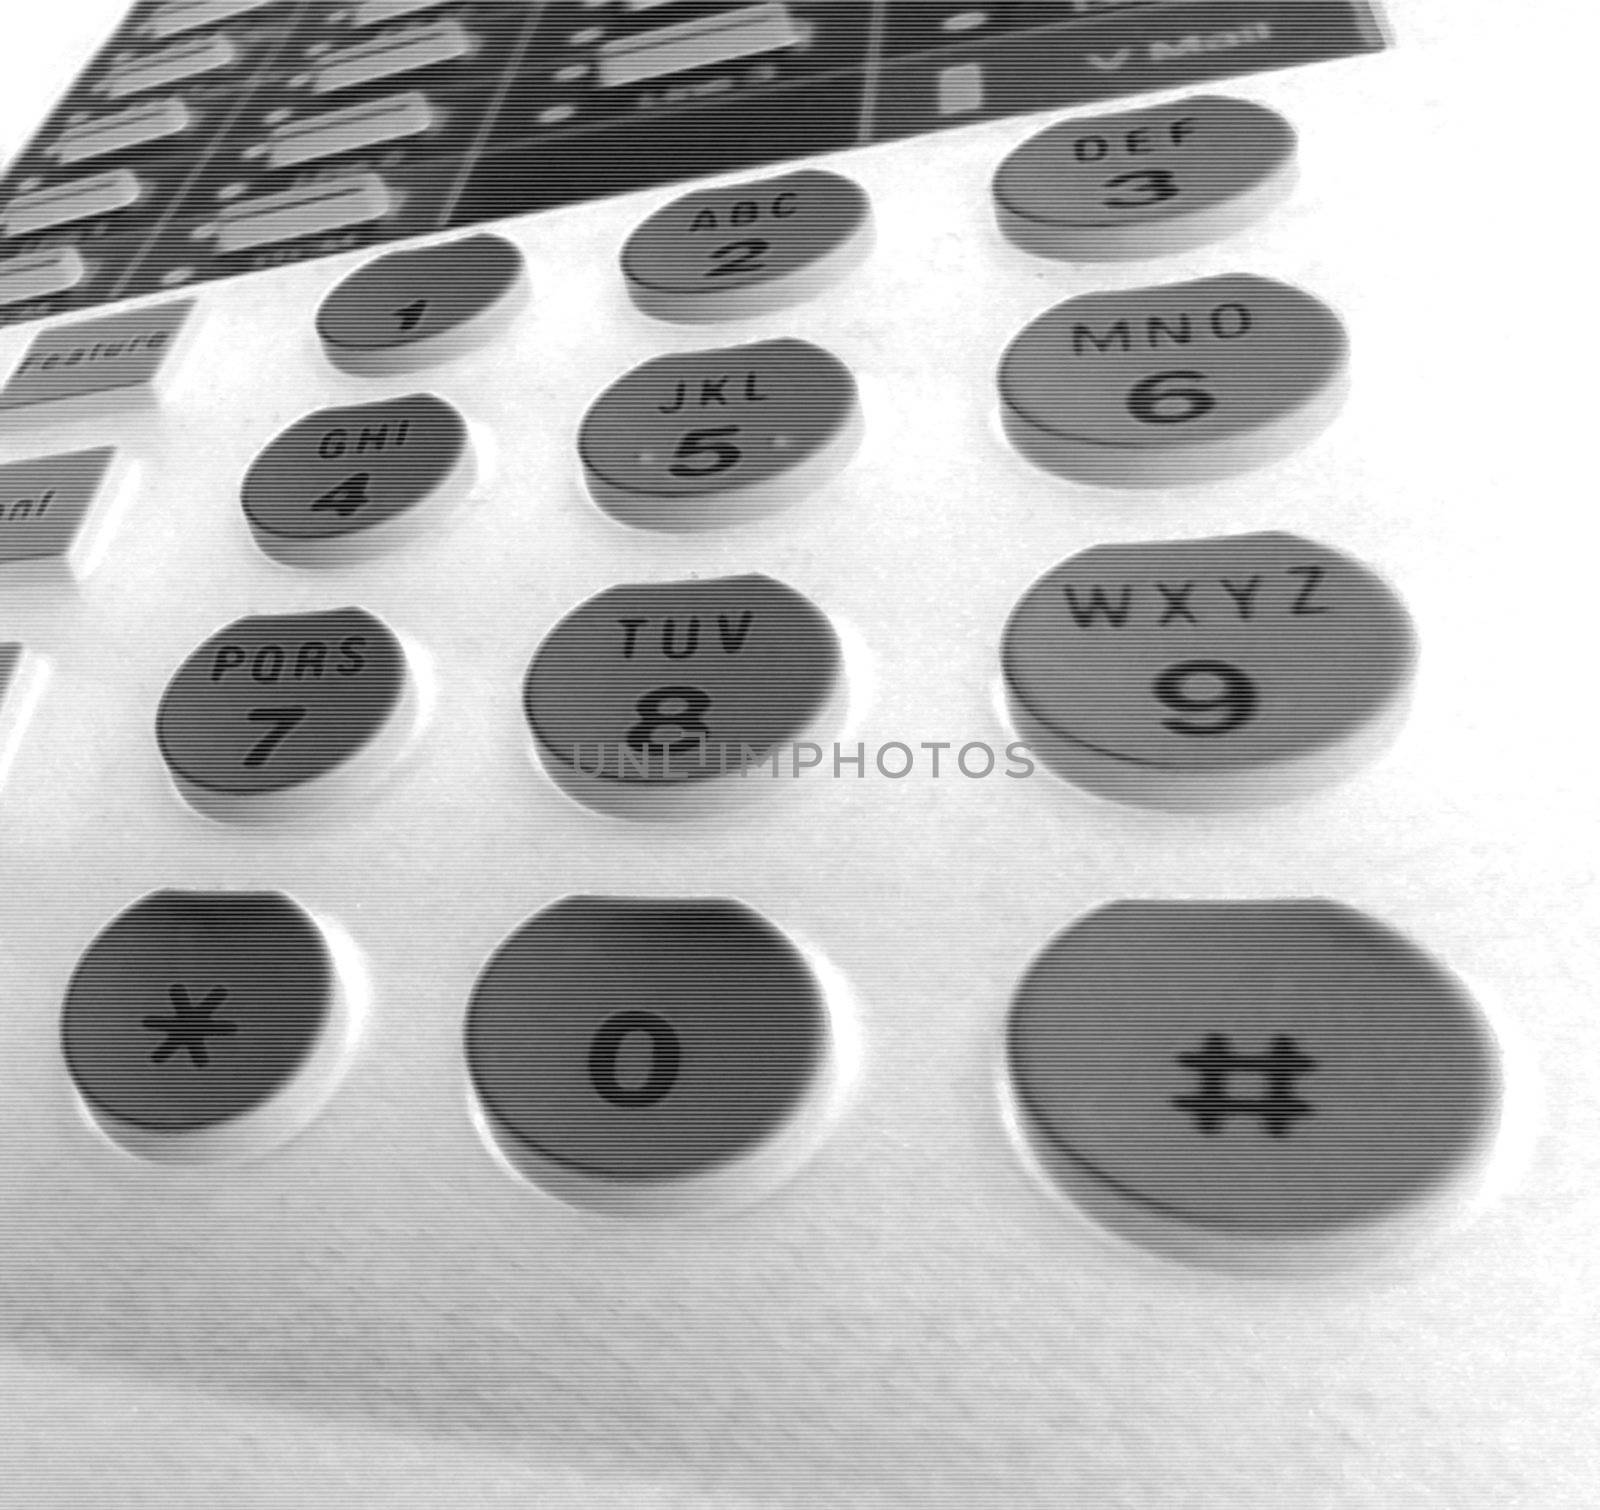 Phone Closeup Inverted by graficallyminded